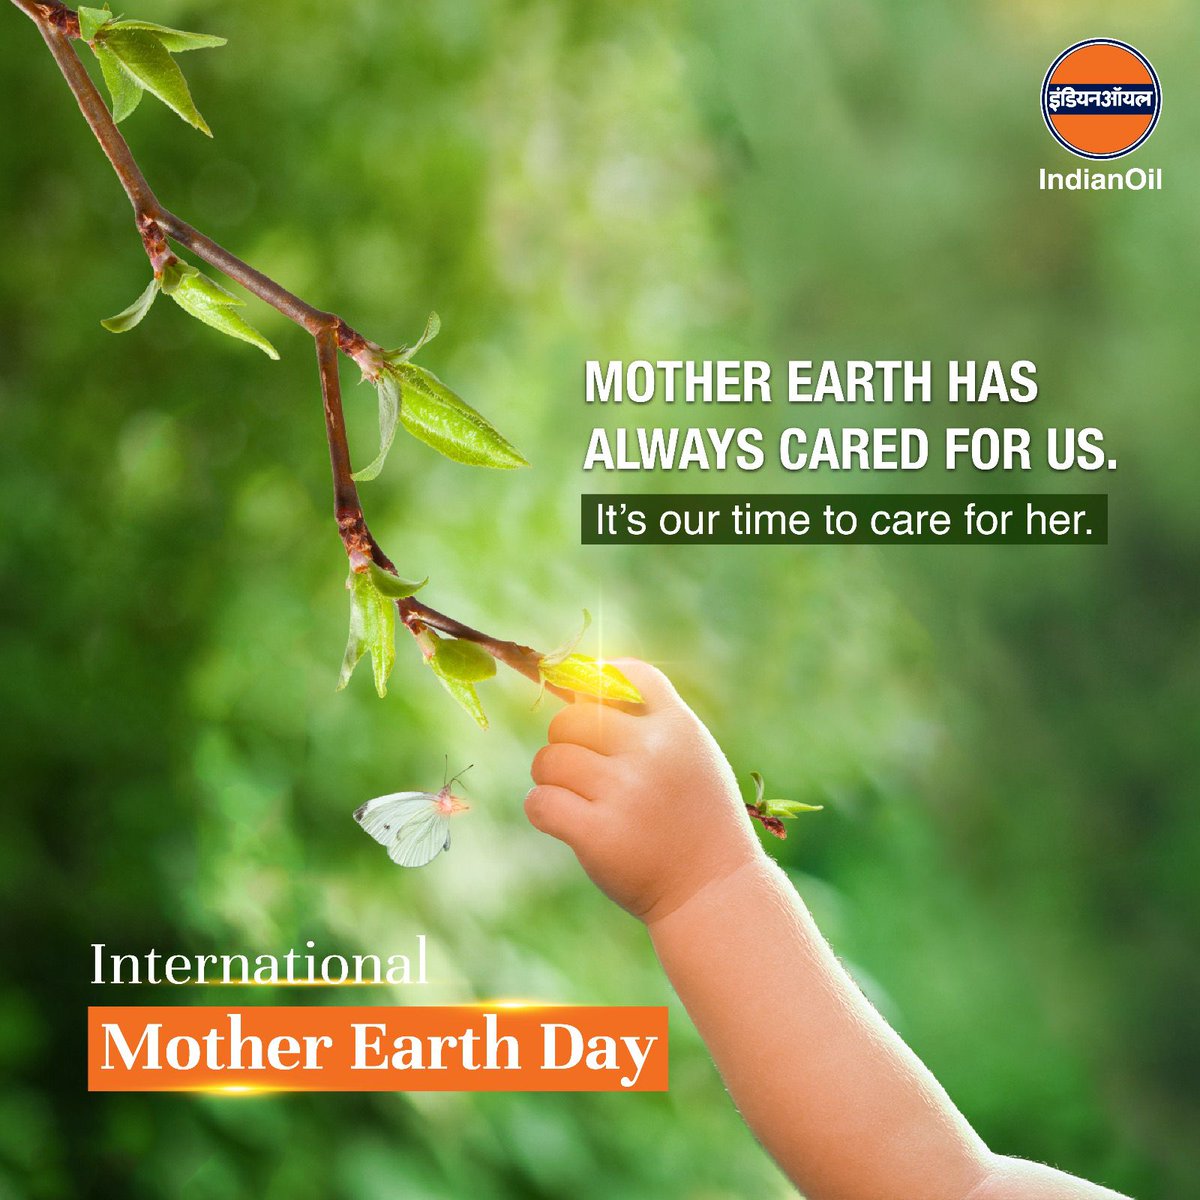 We owe everything to Mother Earth for giving us a beautiful world. This Mother Earth Day, let’s commit towards sustaining and enriching this wonderful  planet.​  
#IndianOil #PehleIndianPhirOil #MotherEarthDay